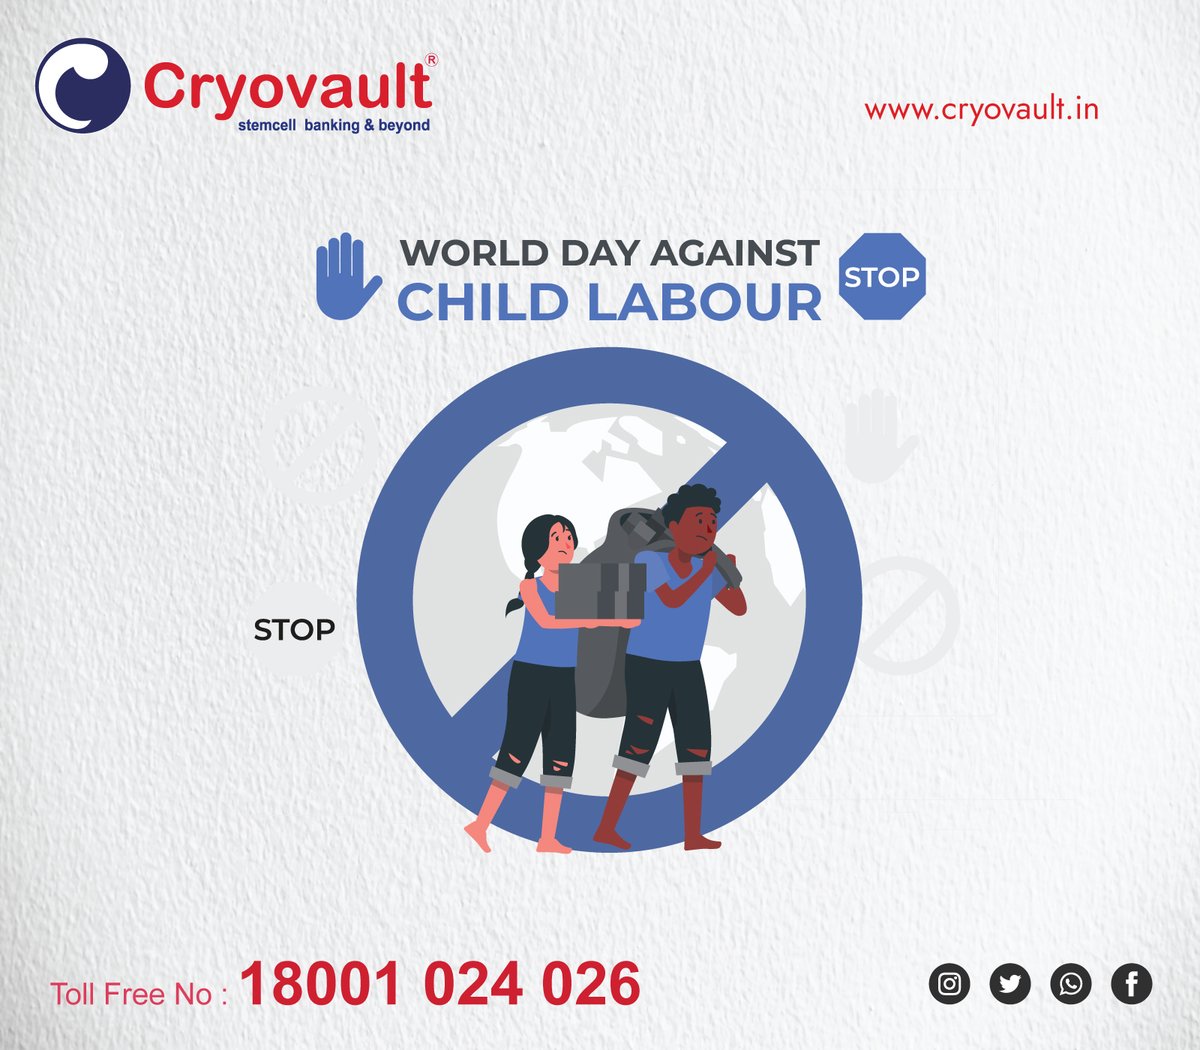 World Day Against Child Labour.......!Call Now:- 18001024026
Visit:- cryovault.in
#cryovault #cordblood #stemcellbanking #stemcelltreatment #stemcellbanking #india #childcare #child #Labour